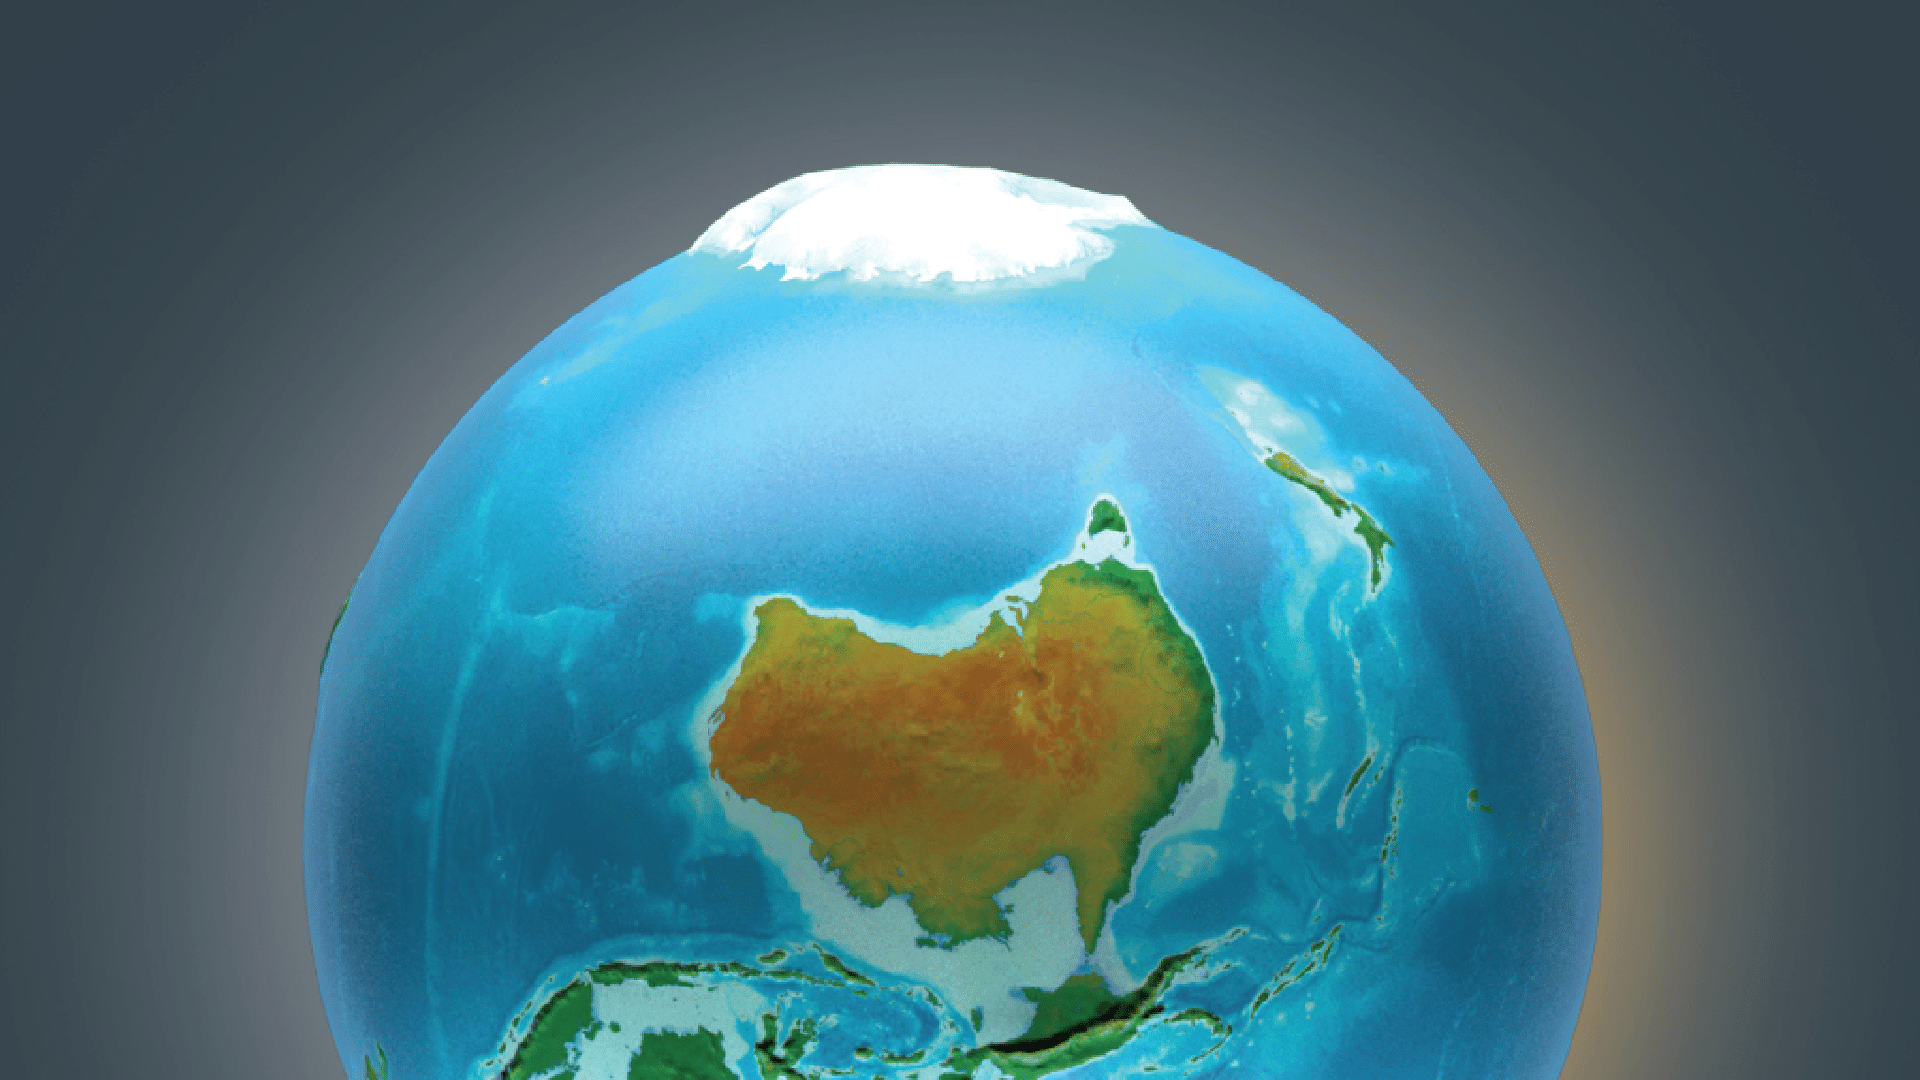 Image of an Australian's view of the world, an upside-down globe